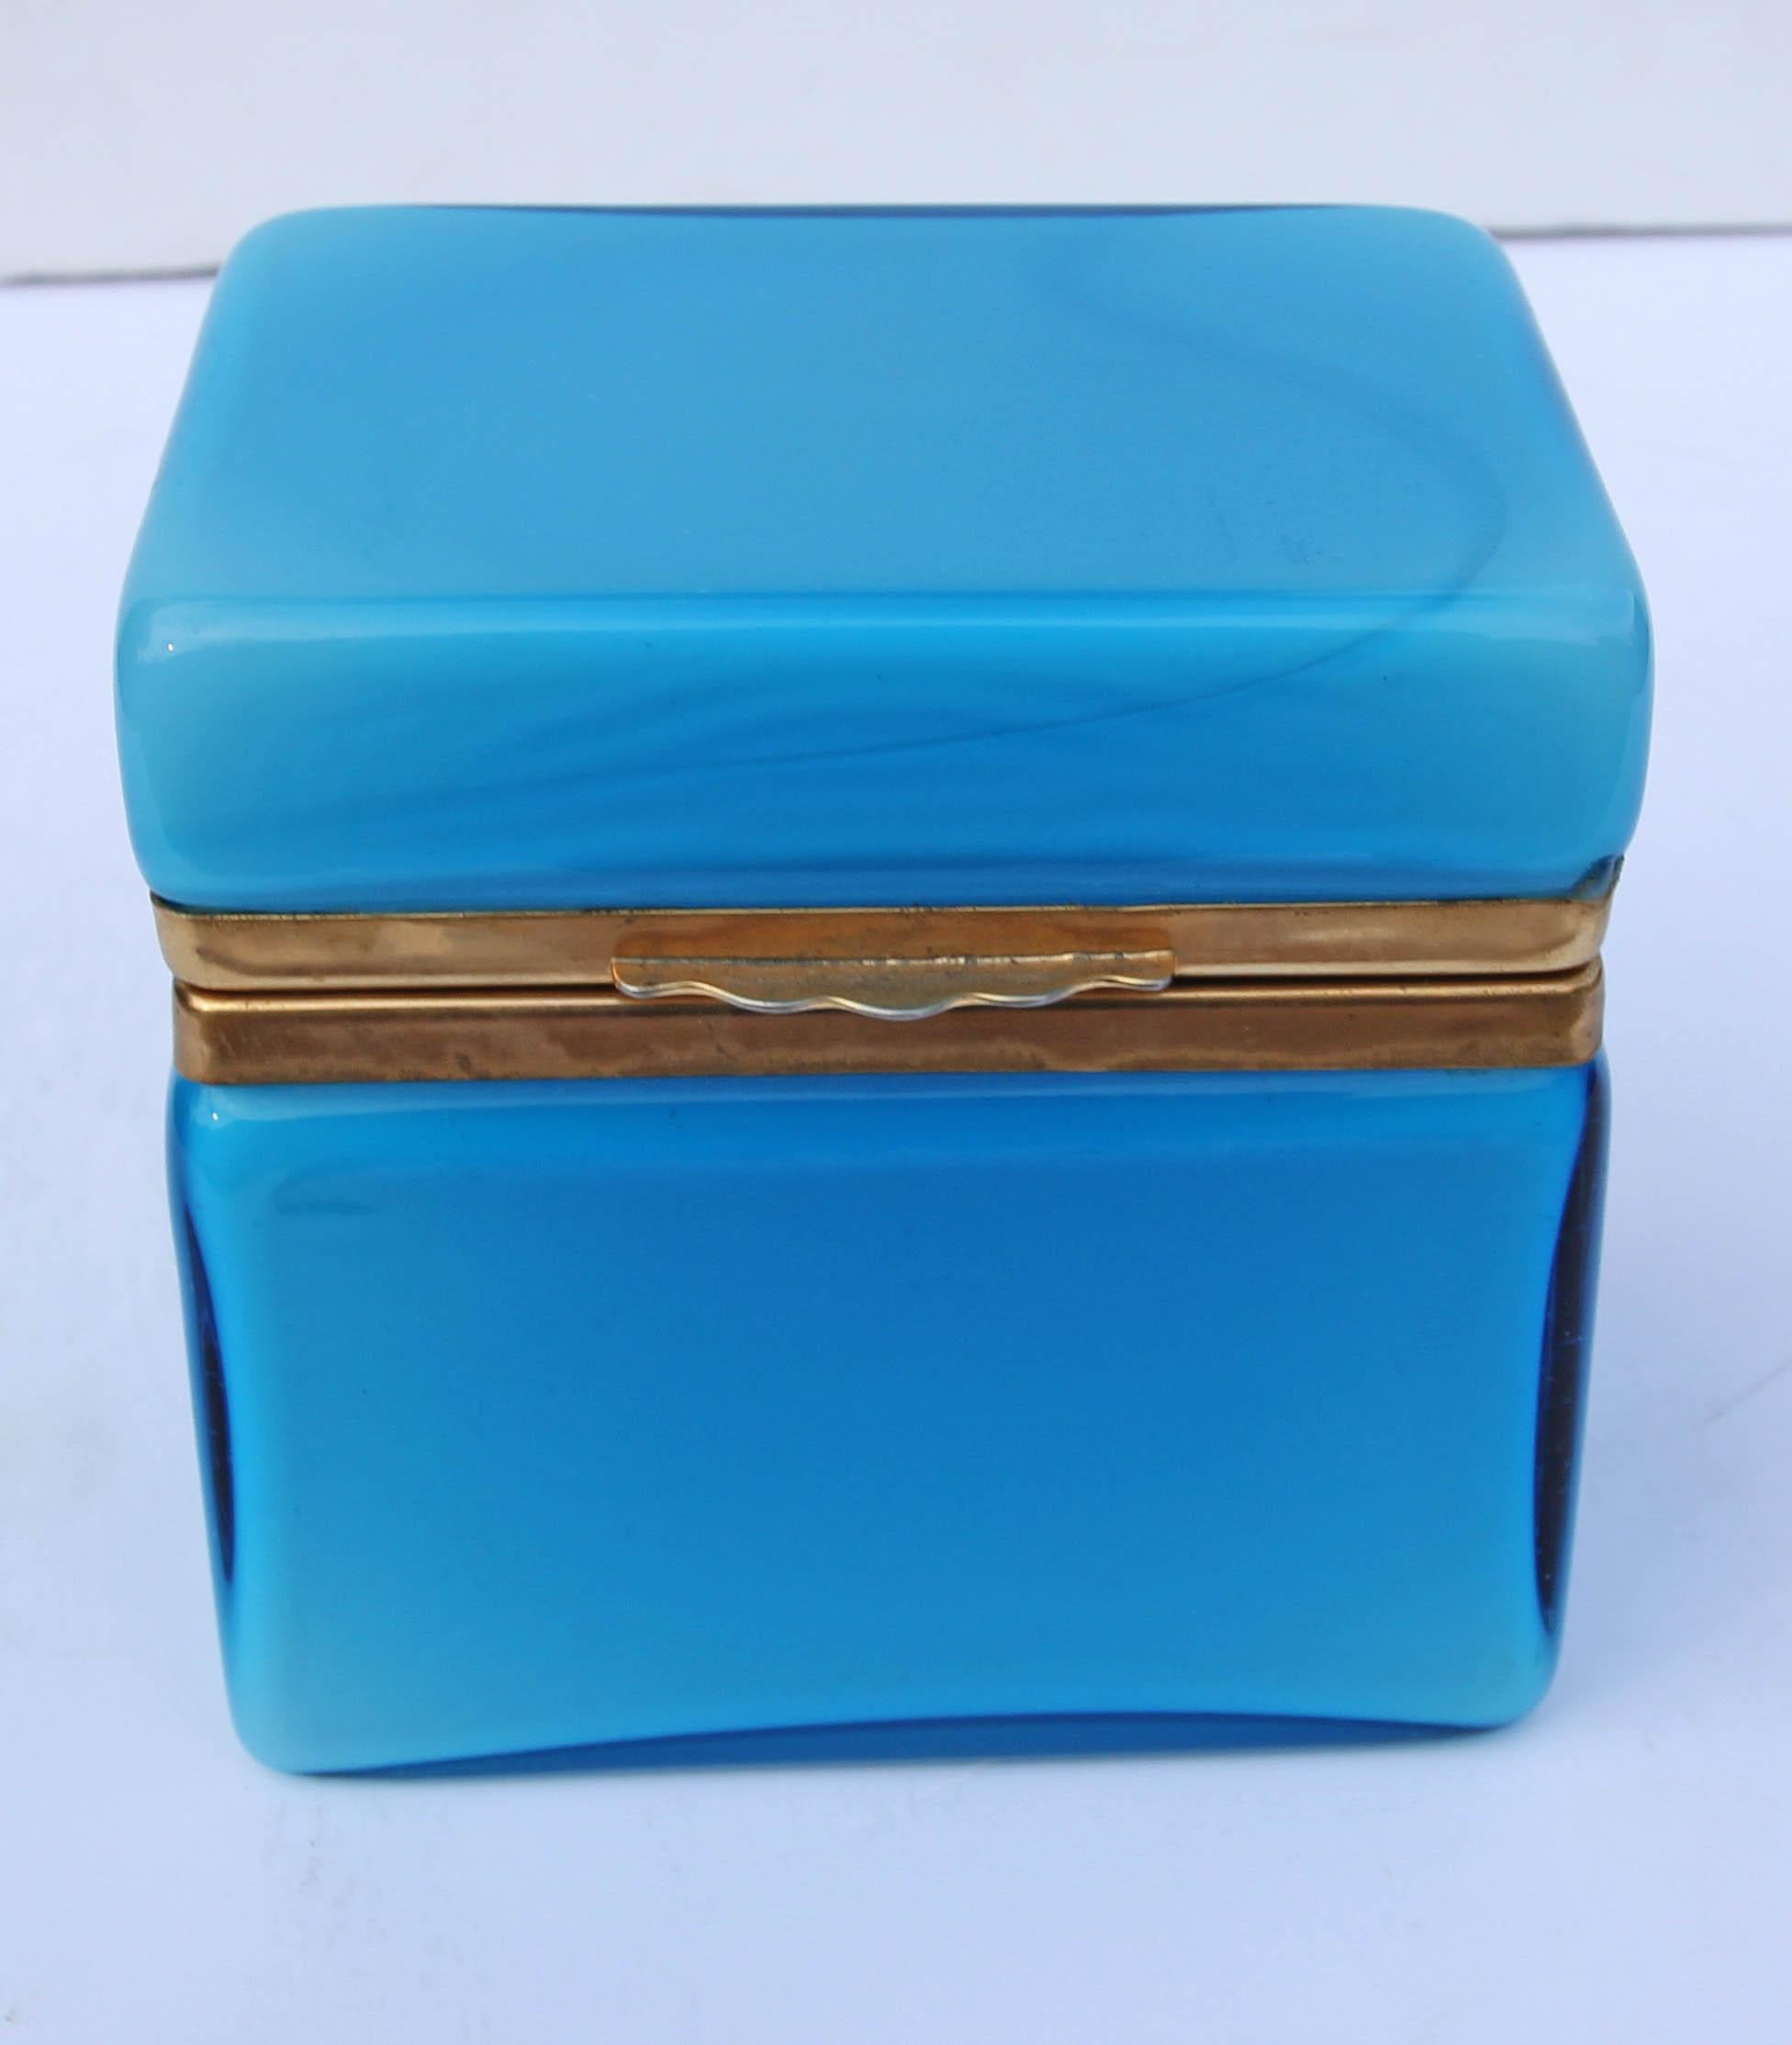 Vintage Murano turquoise blue glass box with brass mounts, circa 1960s.